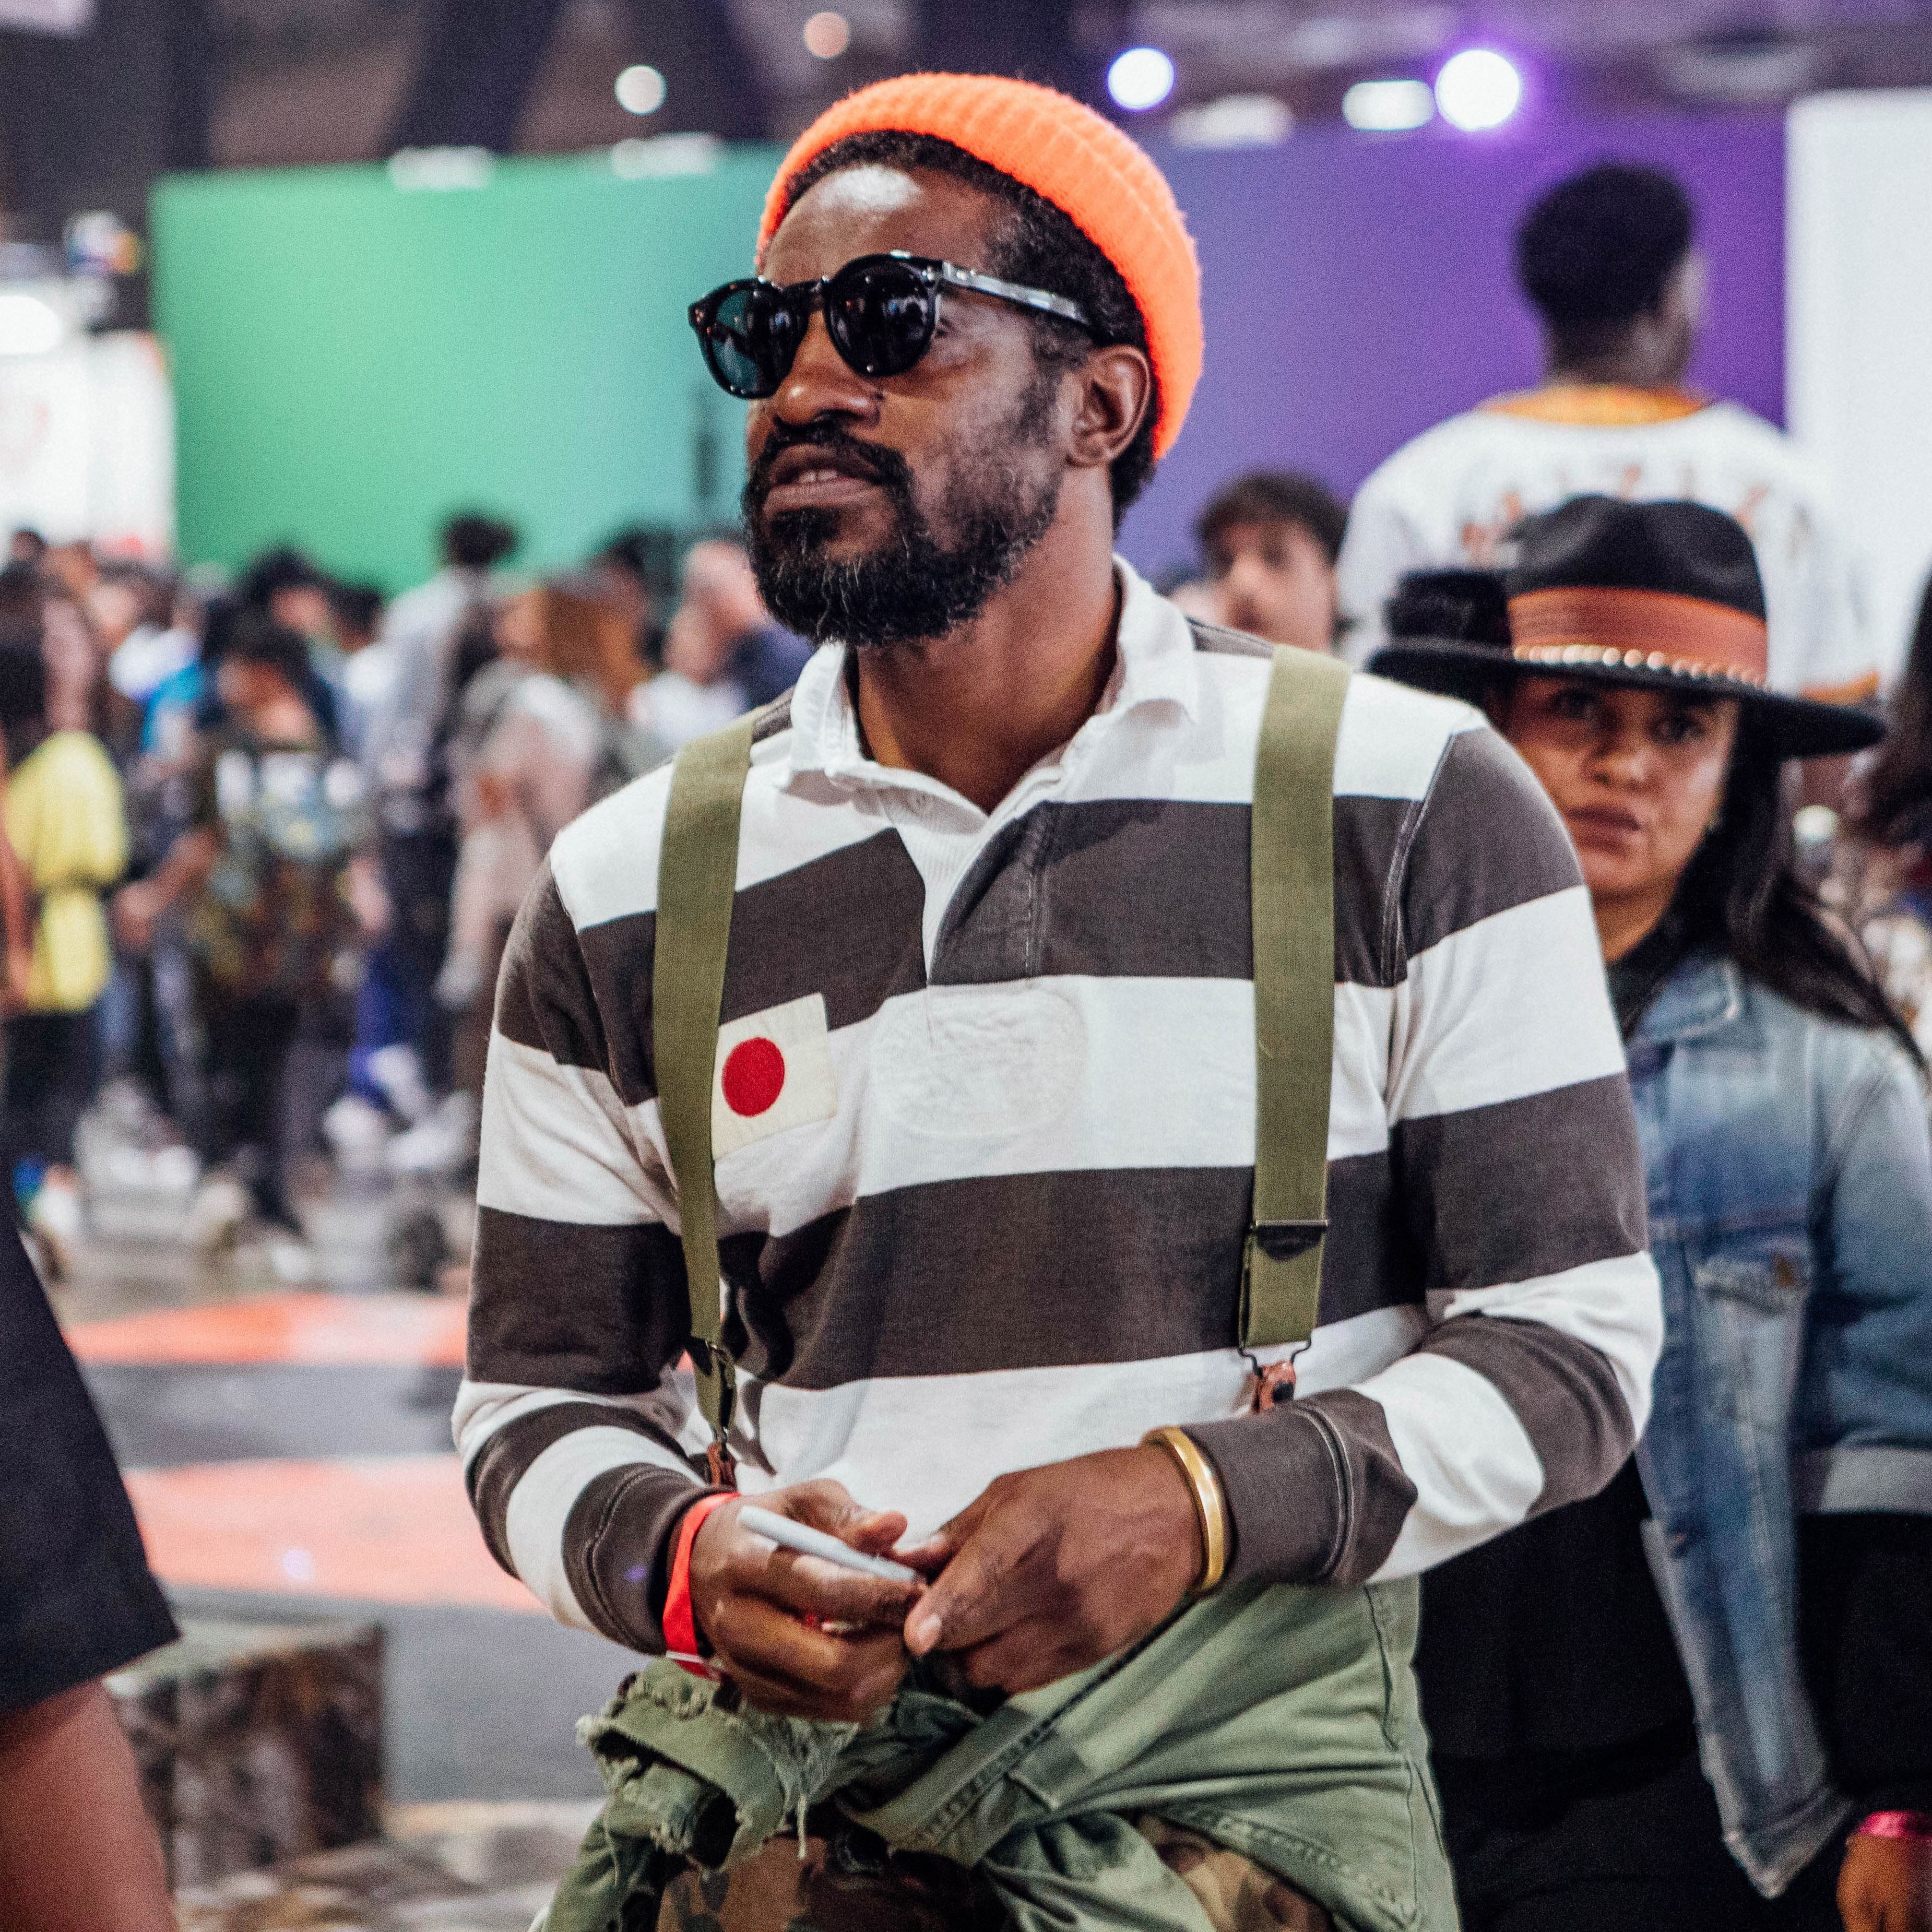 Copy of COMPLEXCON_Andre3000_ANTHONYTREVINO-8